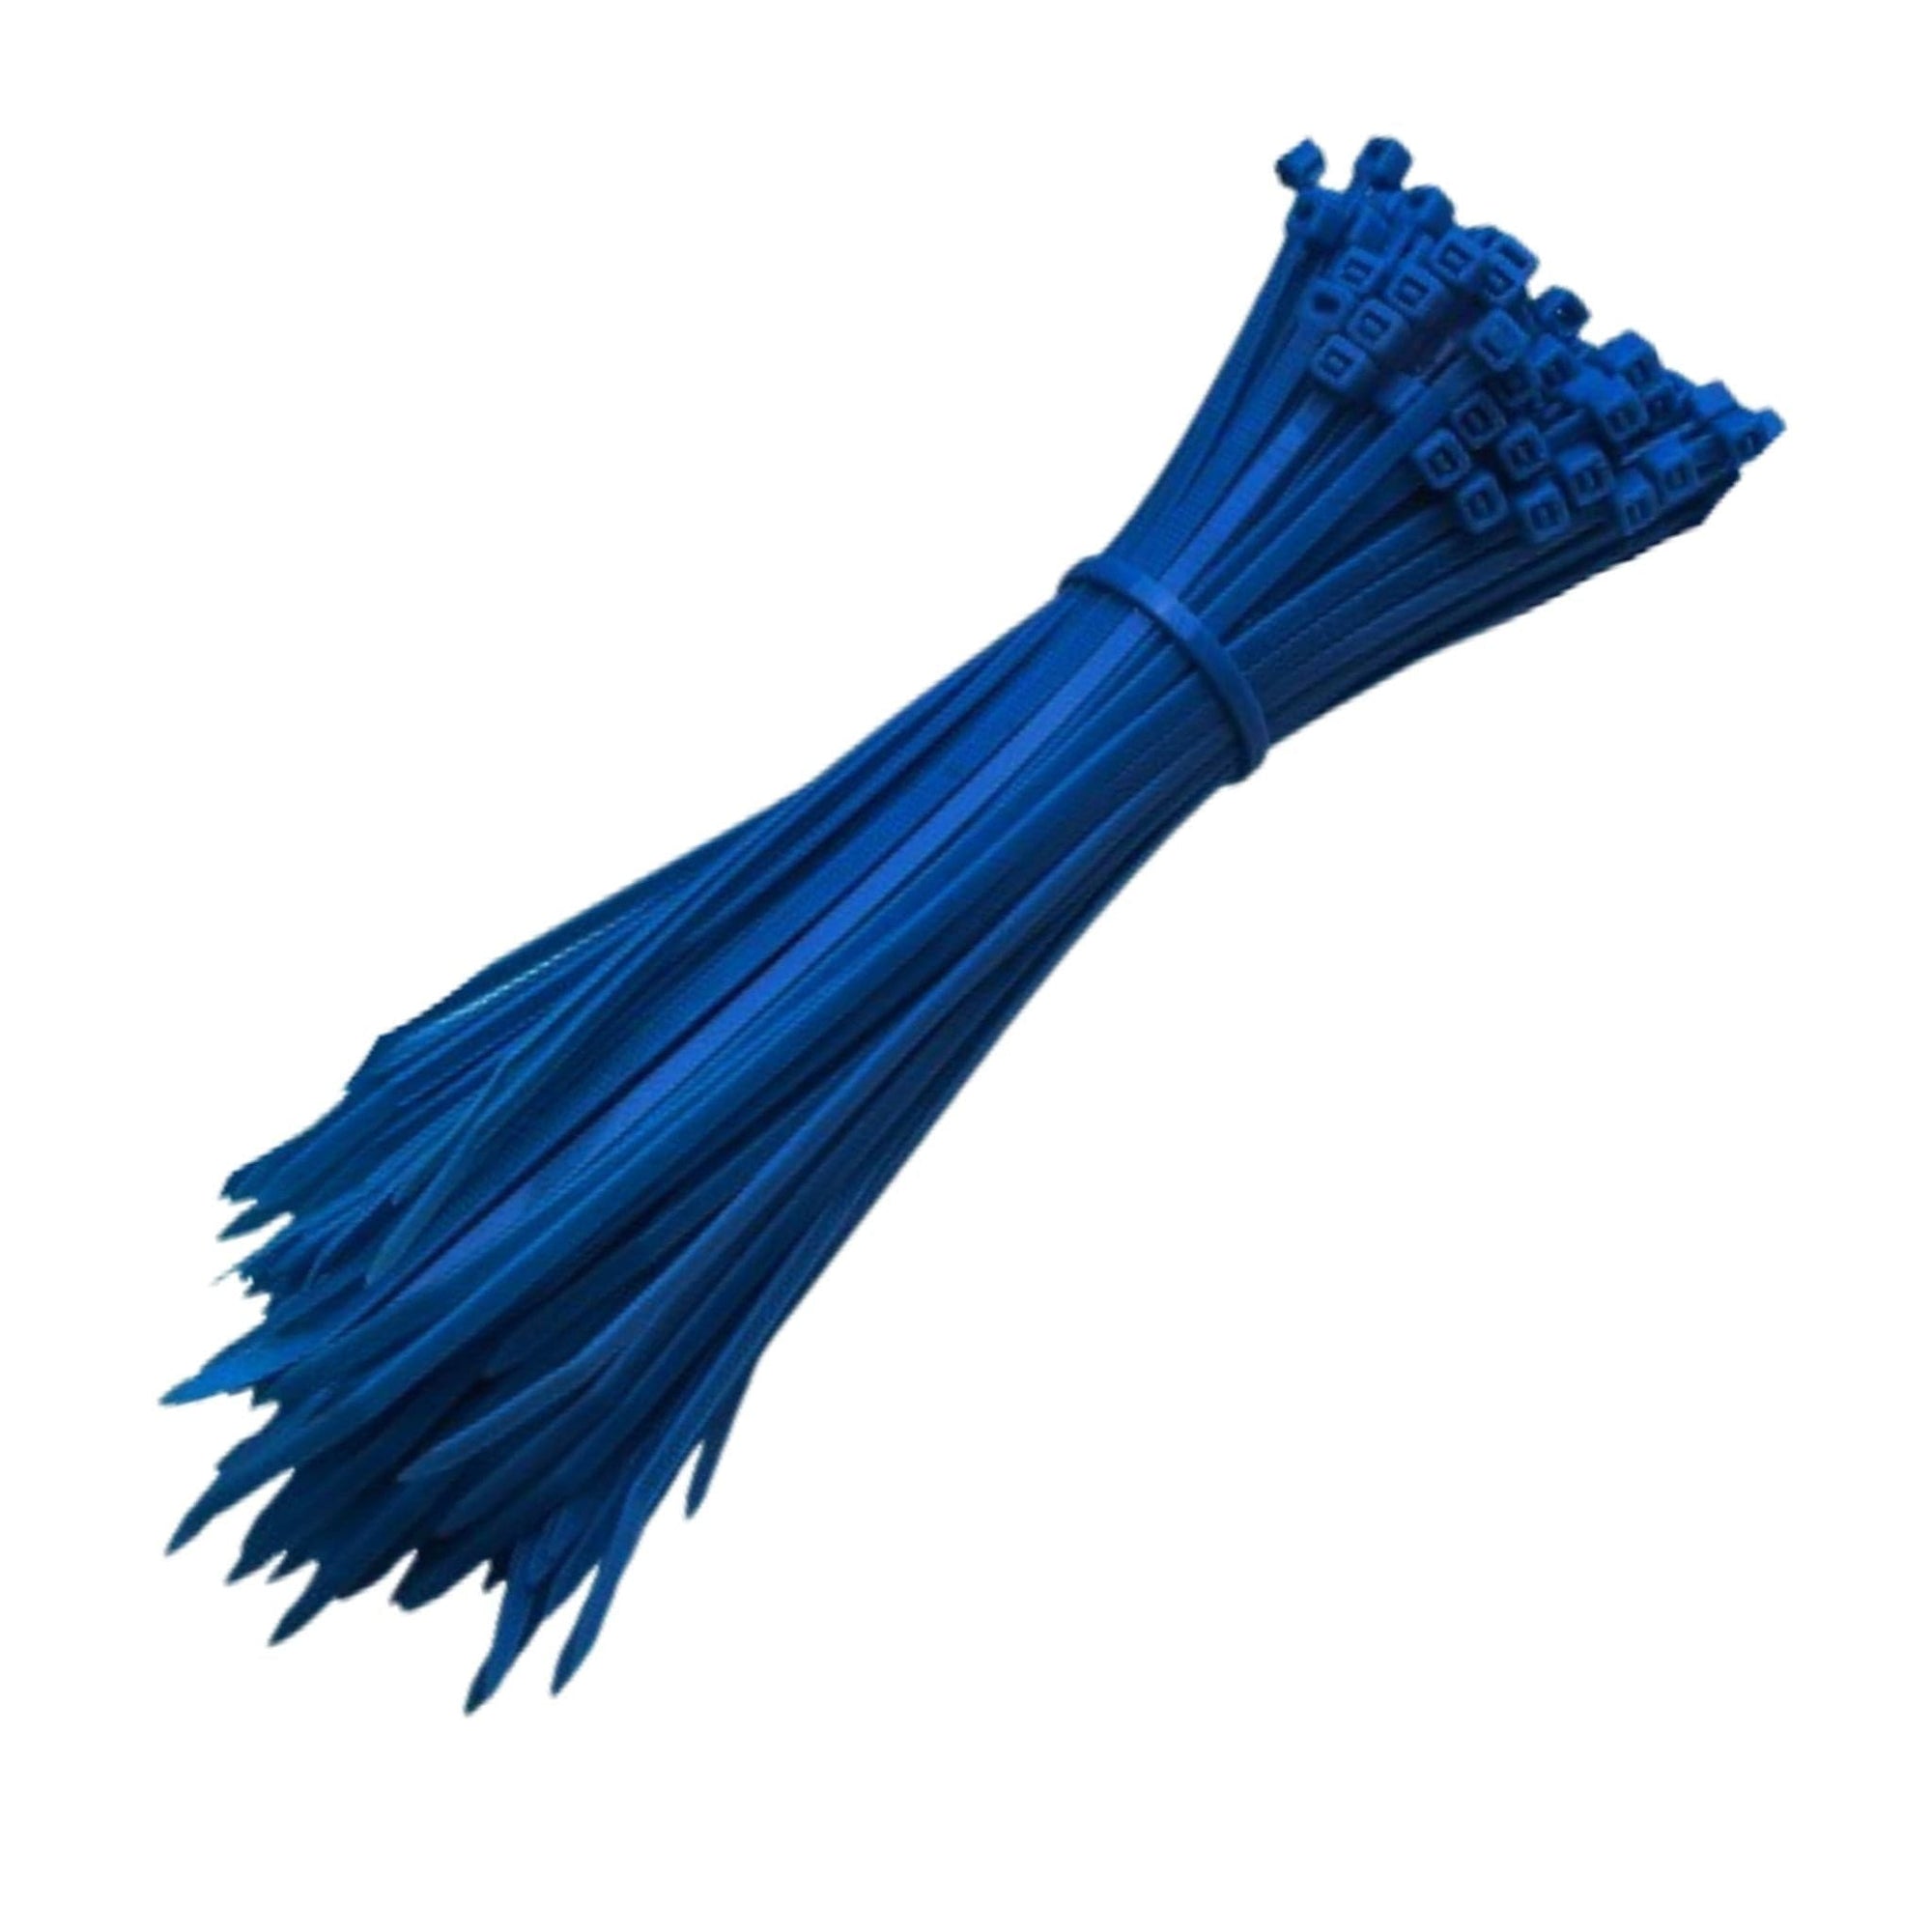 Blue Cable Ties (100 Pack) - 4.8mm x 200mm - South East Clearance Centre